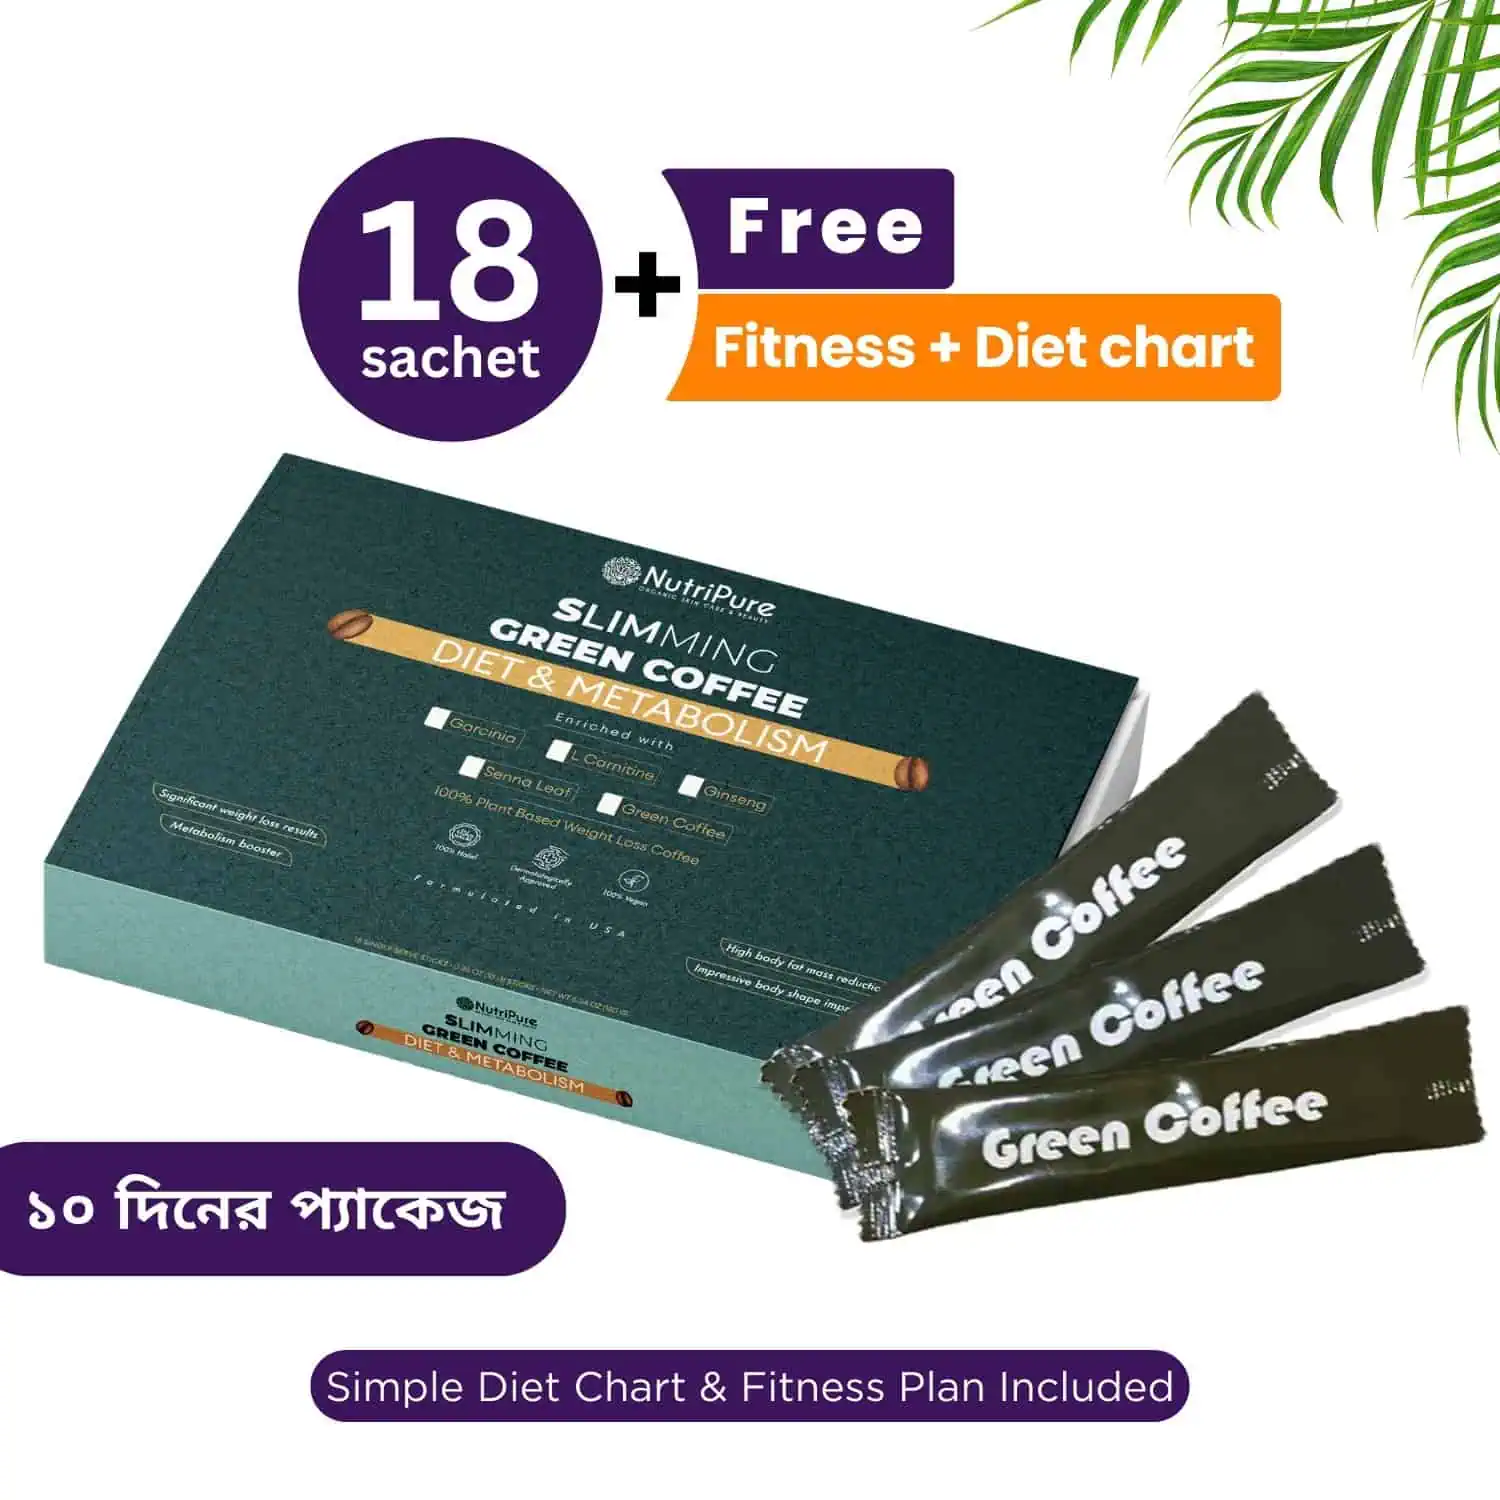 Slimming Green Coffee 10 Days Pack.